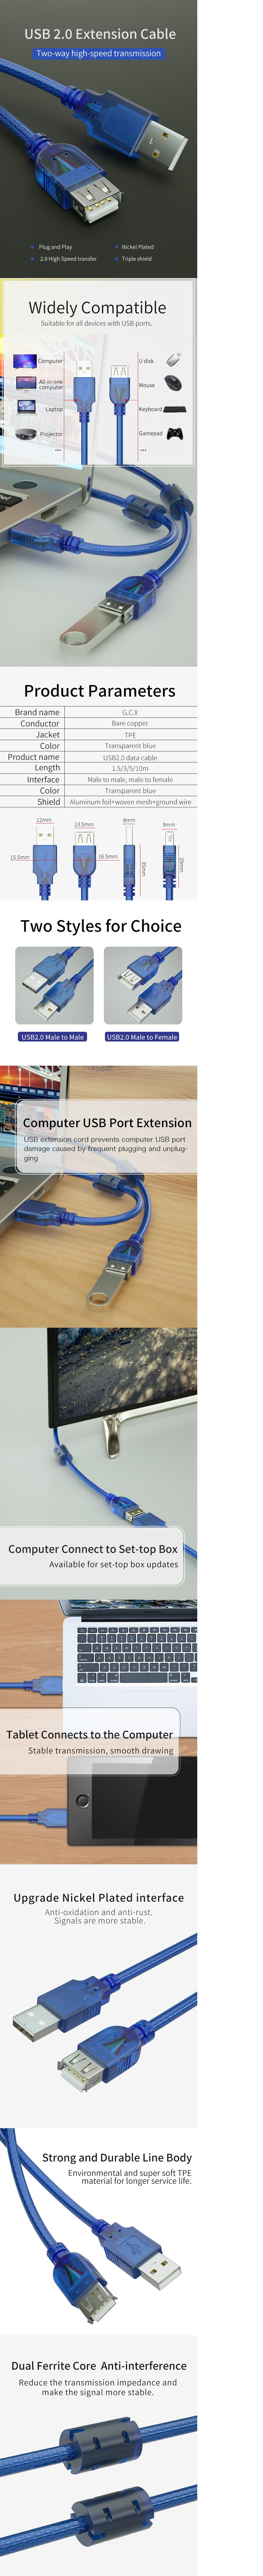 GCX-USB-Male-to-Female-Extension-Cable-Data-Cable-USB20-Core-Wire-Transparent-Blue-Data-Cable-for-Co-1690321